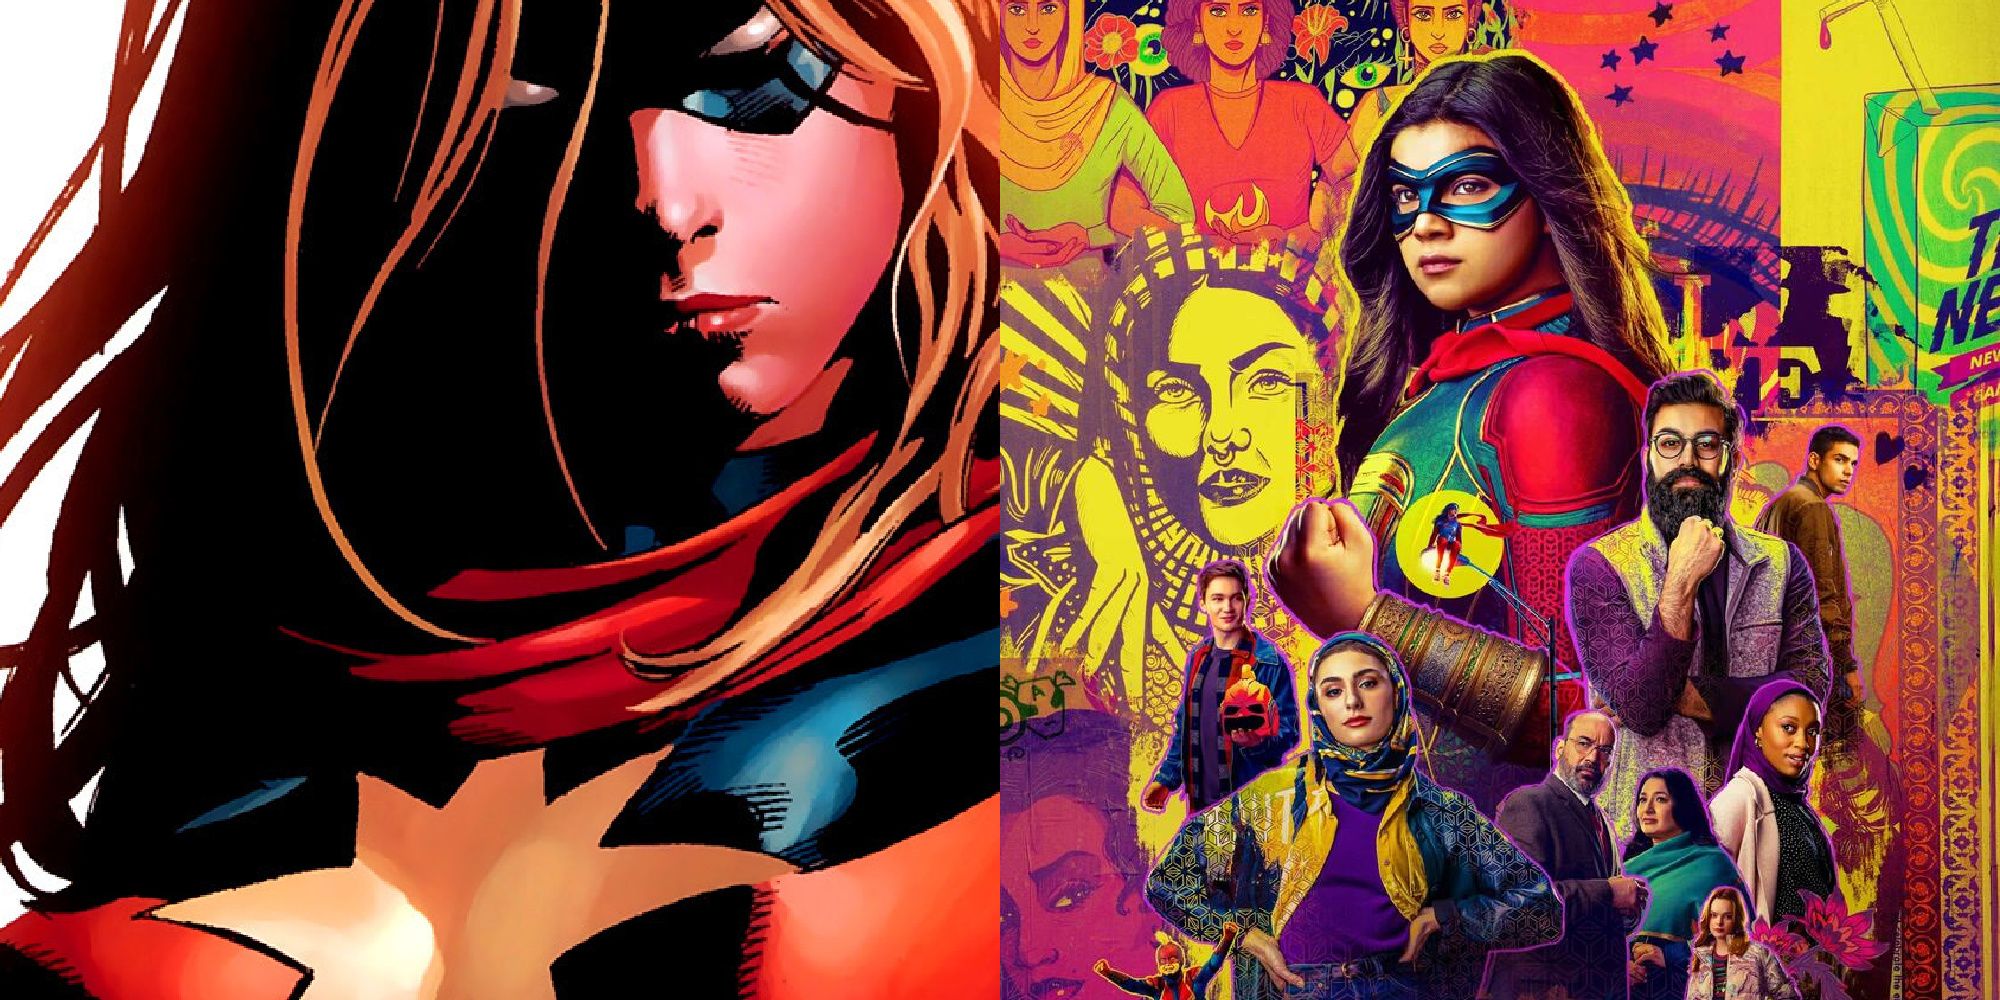 Split image of Karla Sofen as Ms. Marvel in Marvel Comics and the Ms. Marvel MCU poster.